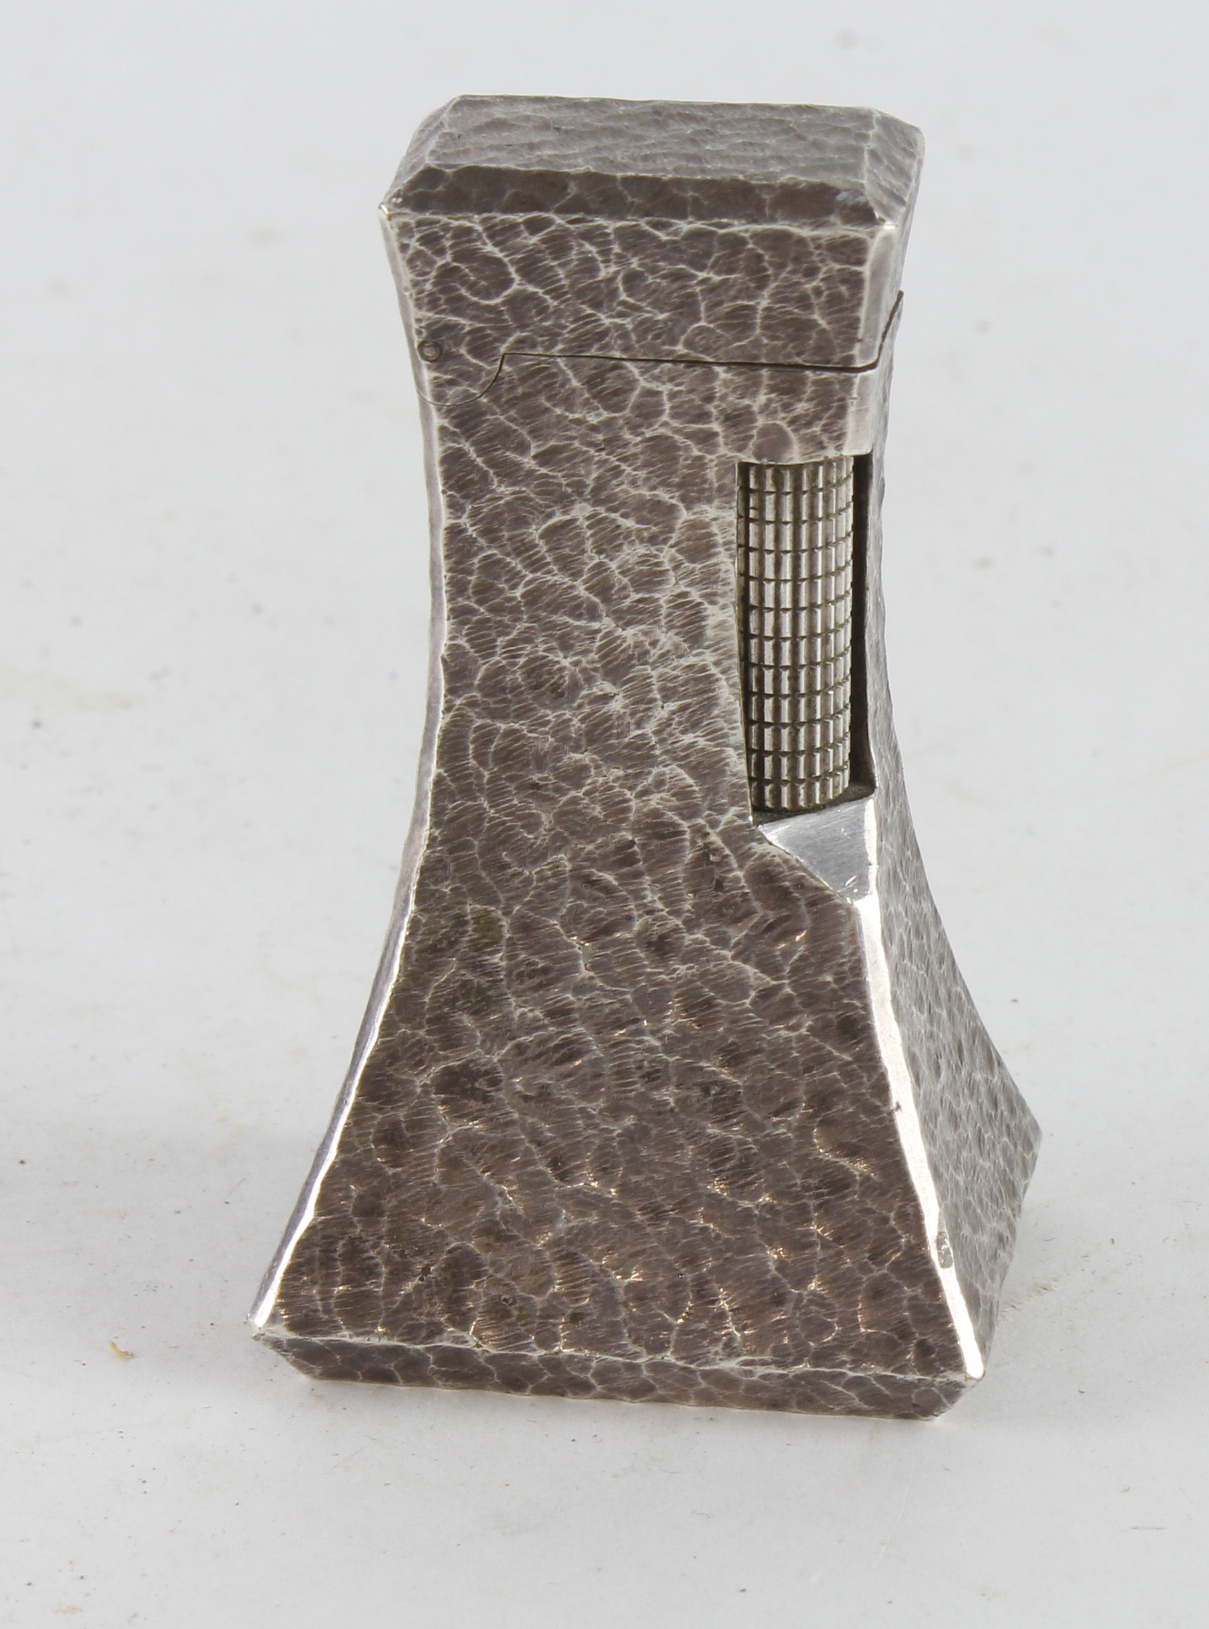 Dunhill white metal lighter (unusual shape), makers stamp to base, height 70mm (untested)